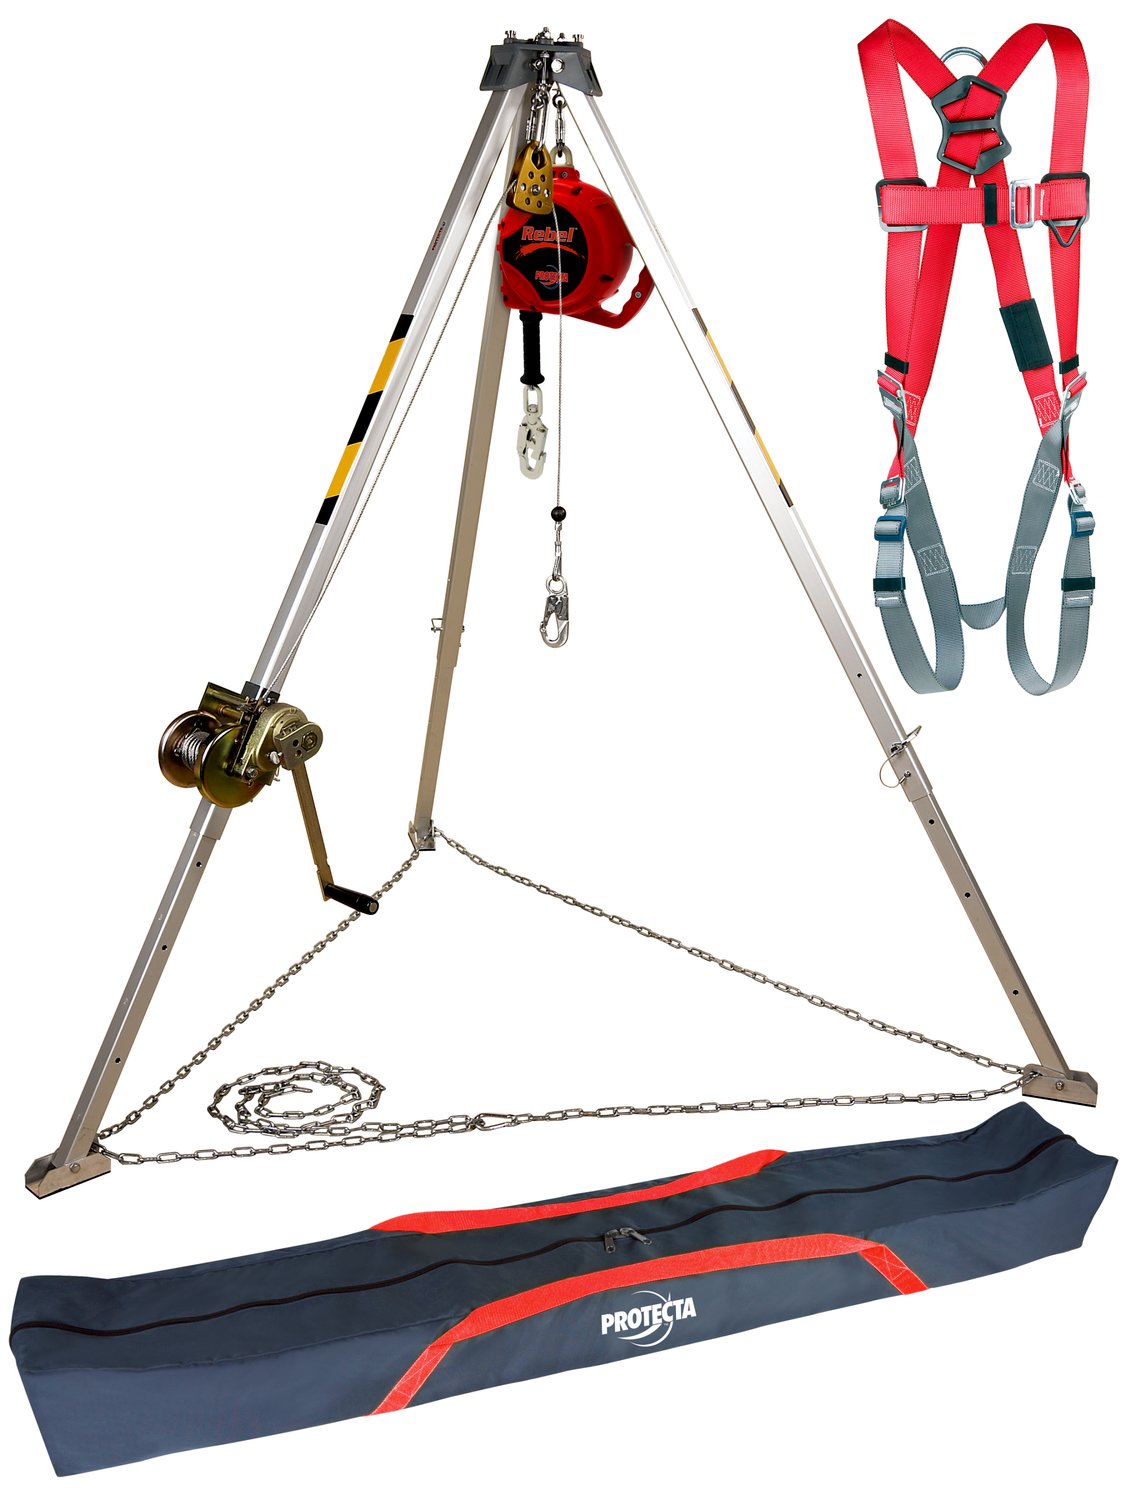 7100313942 - 3M Protecta Confined Space Aluminum Tripod with Winch/SRL/Harness/Bag
AA805AG2, 8 ft High, 50 ft and 50 ft Galvanized Cable